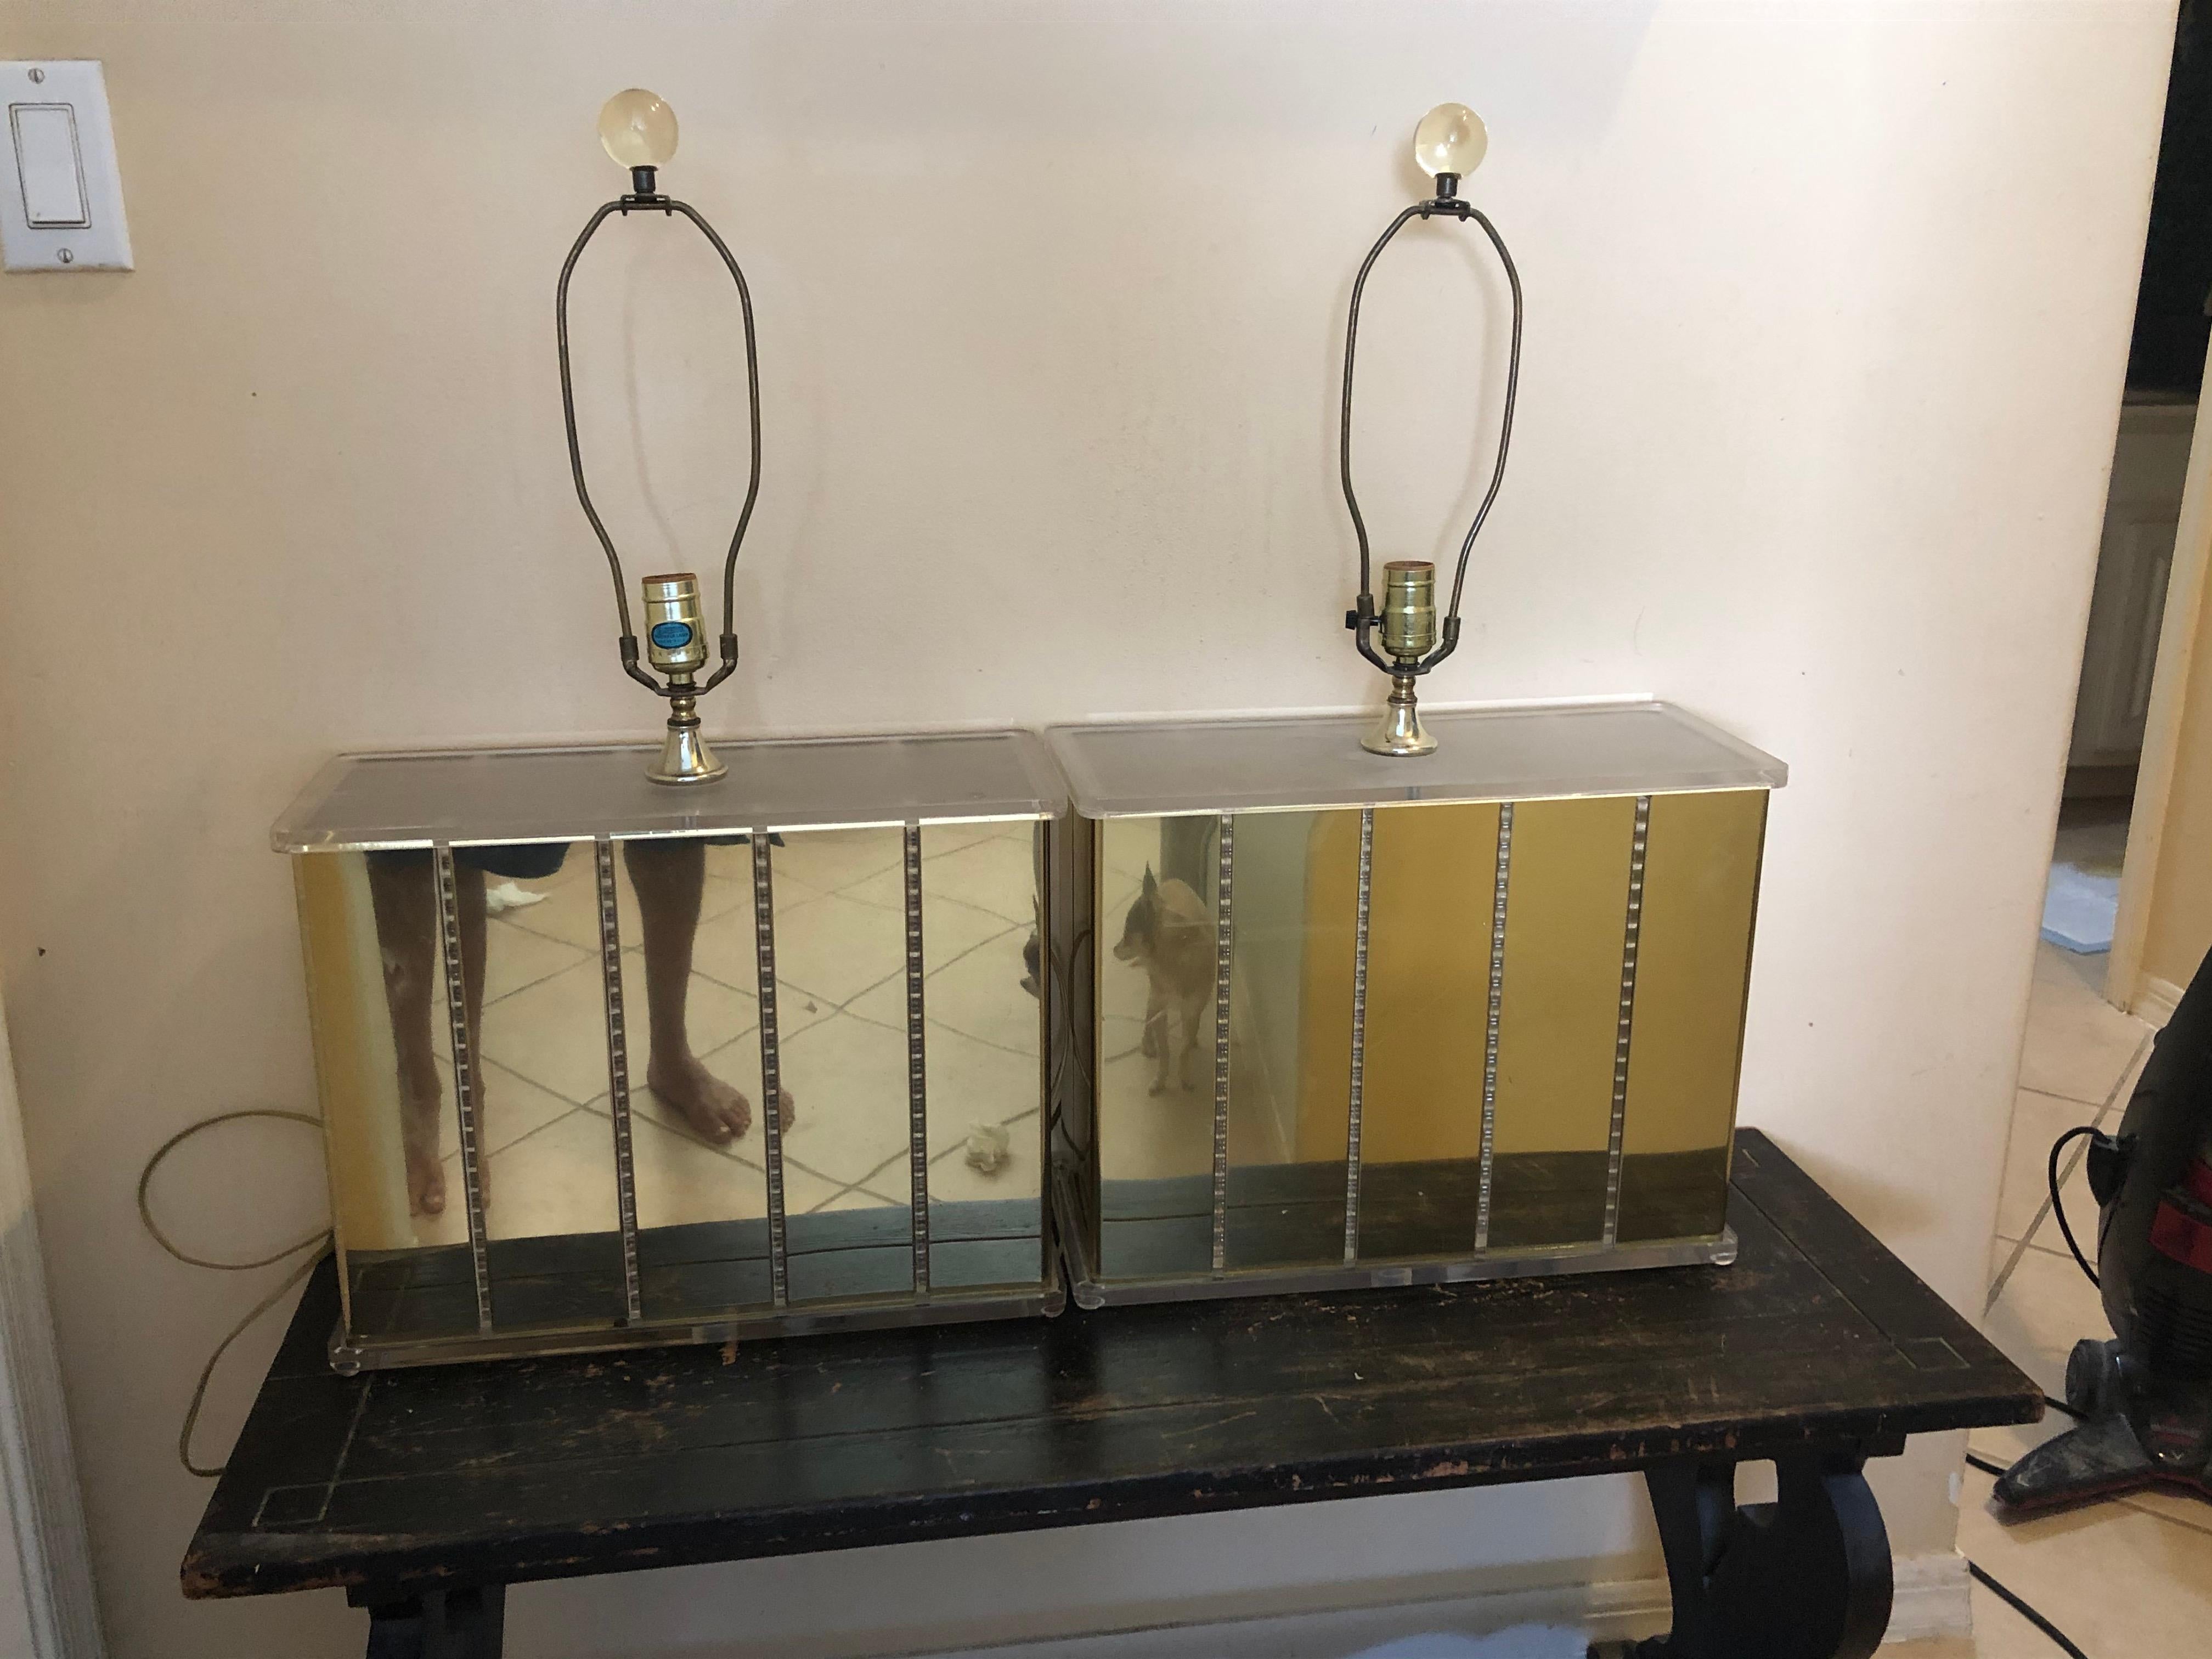 Fabulous pair of Lucite and mirrored brass or gold plate. Lamps by Optique. These are the largest and widest I have seen of this rare style. Probably made in the 1970s.